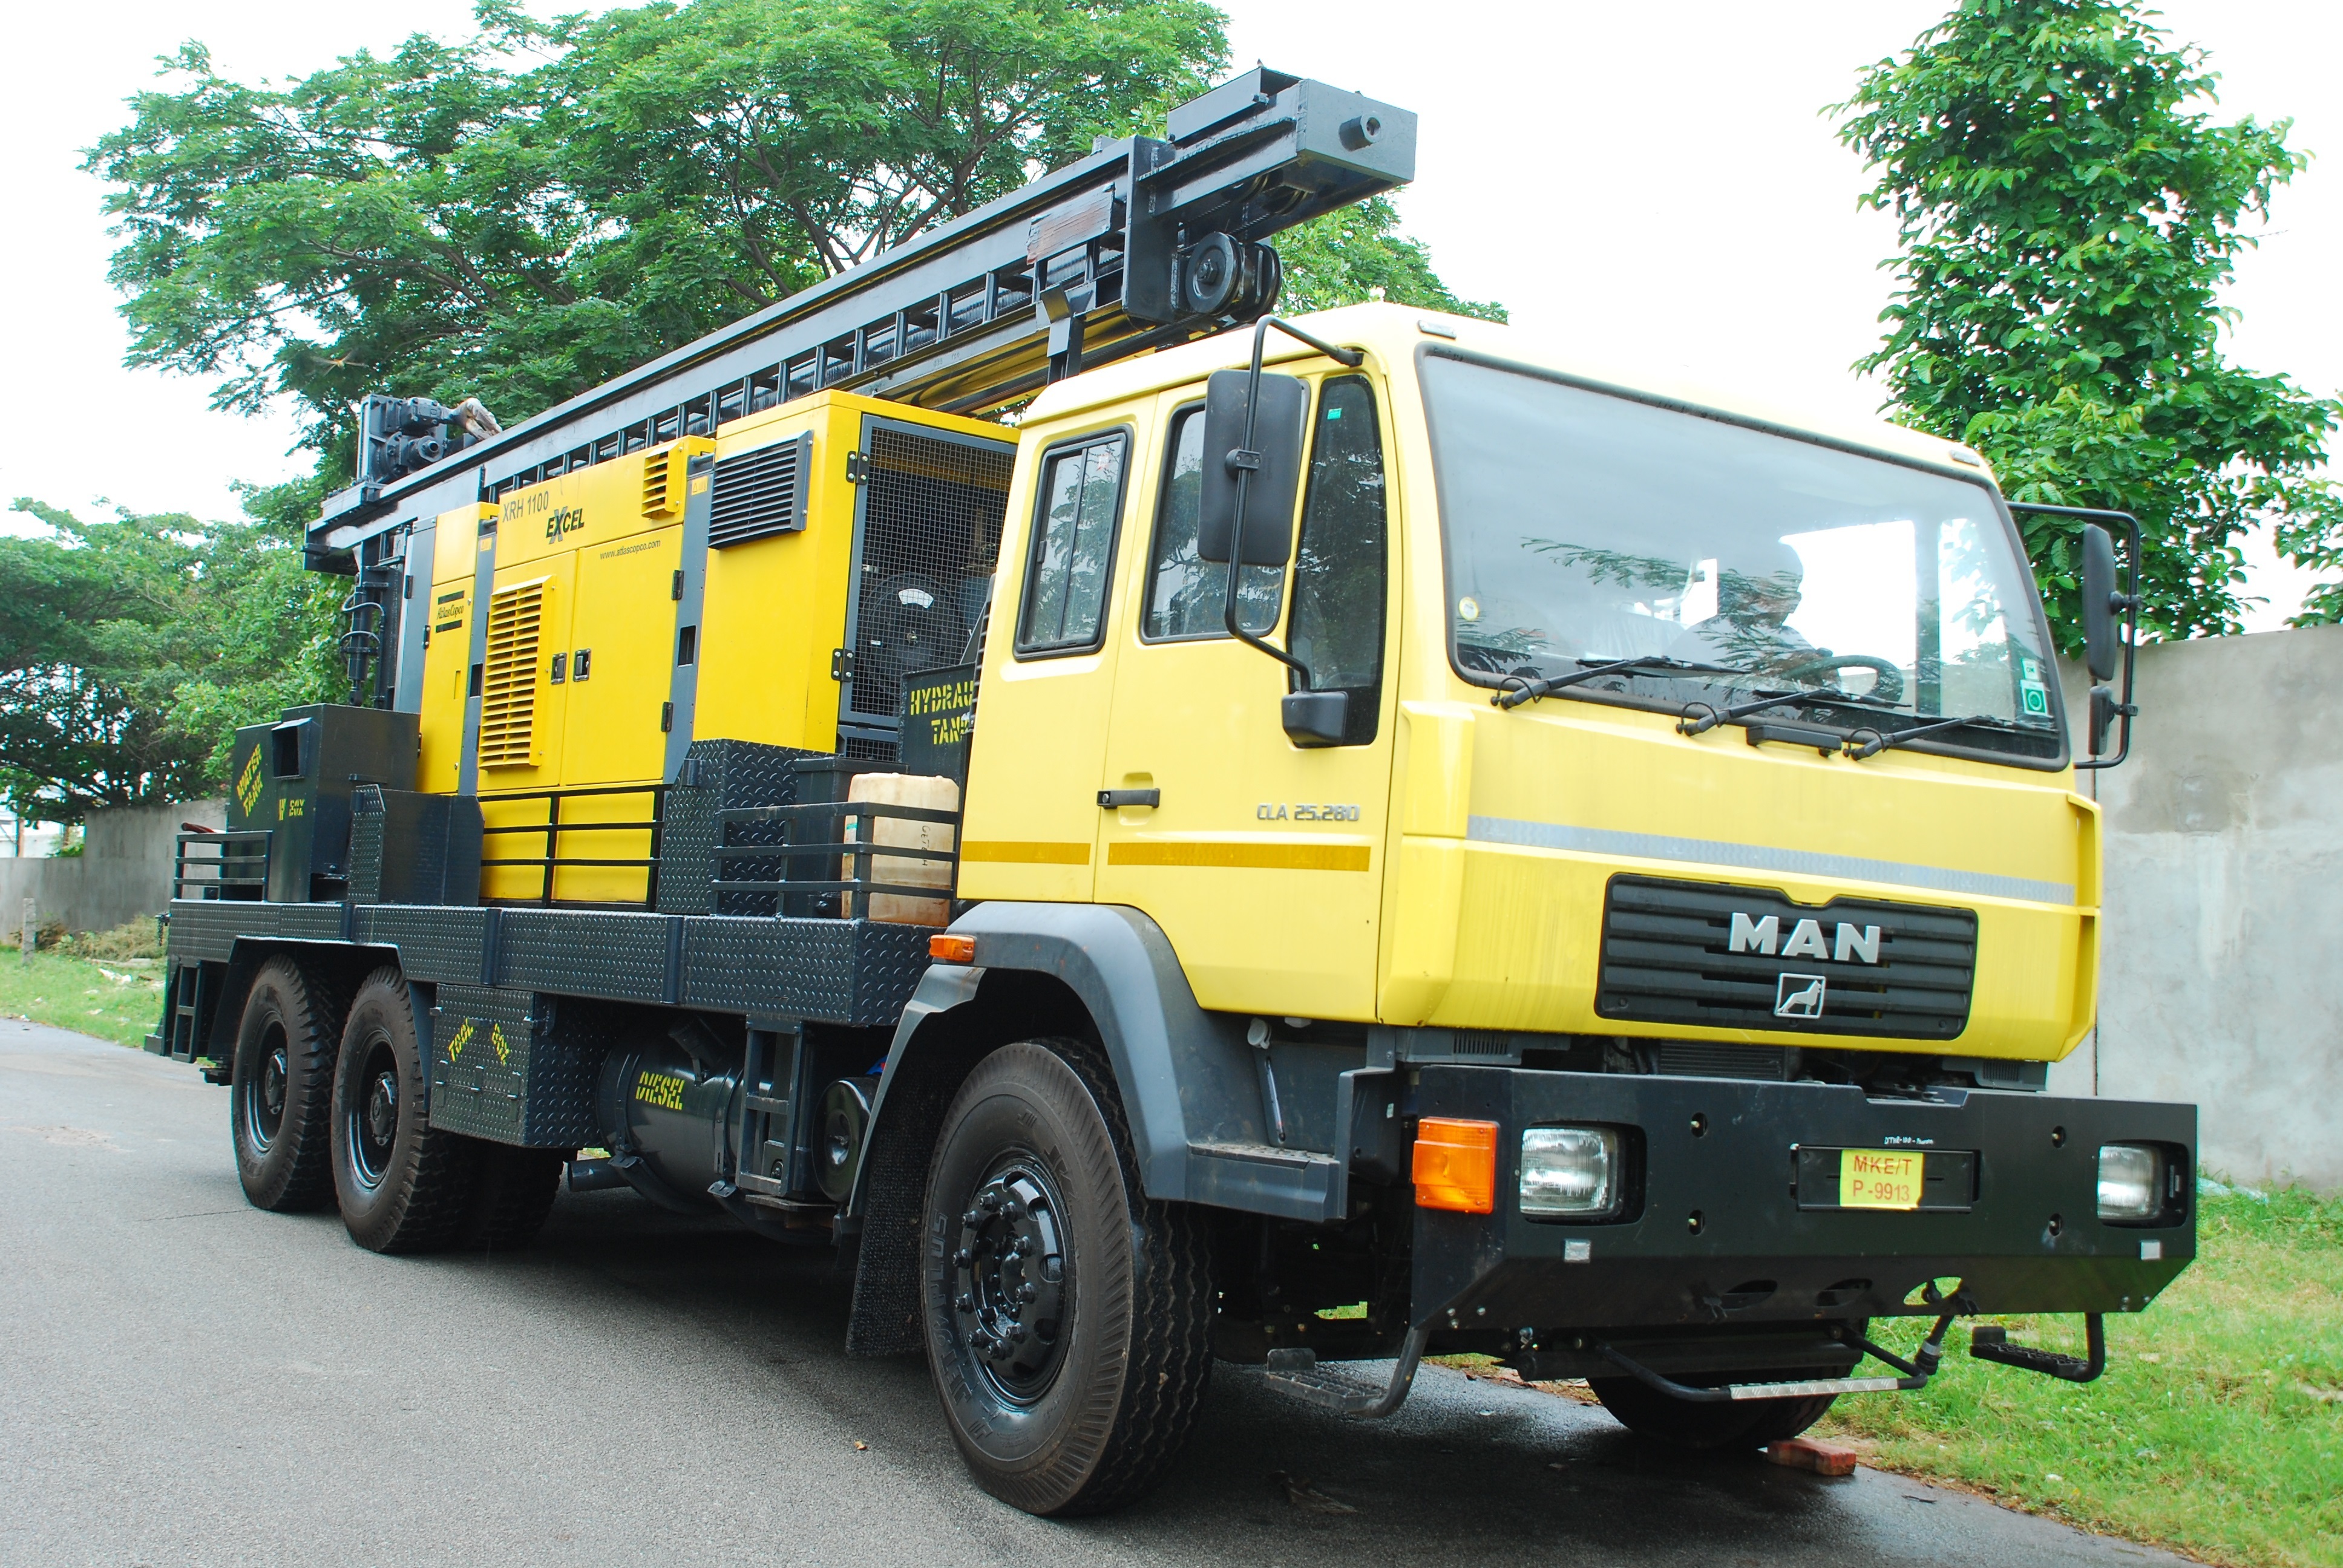 PDTH-450 Water Drilling Rig